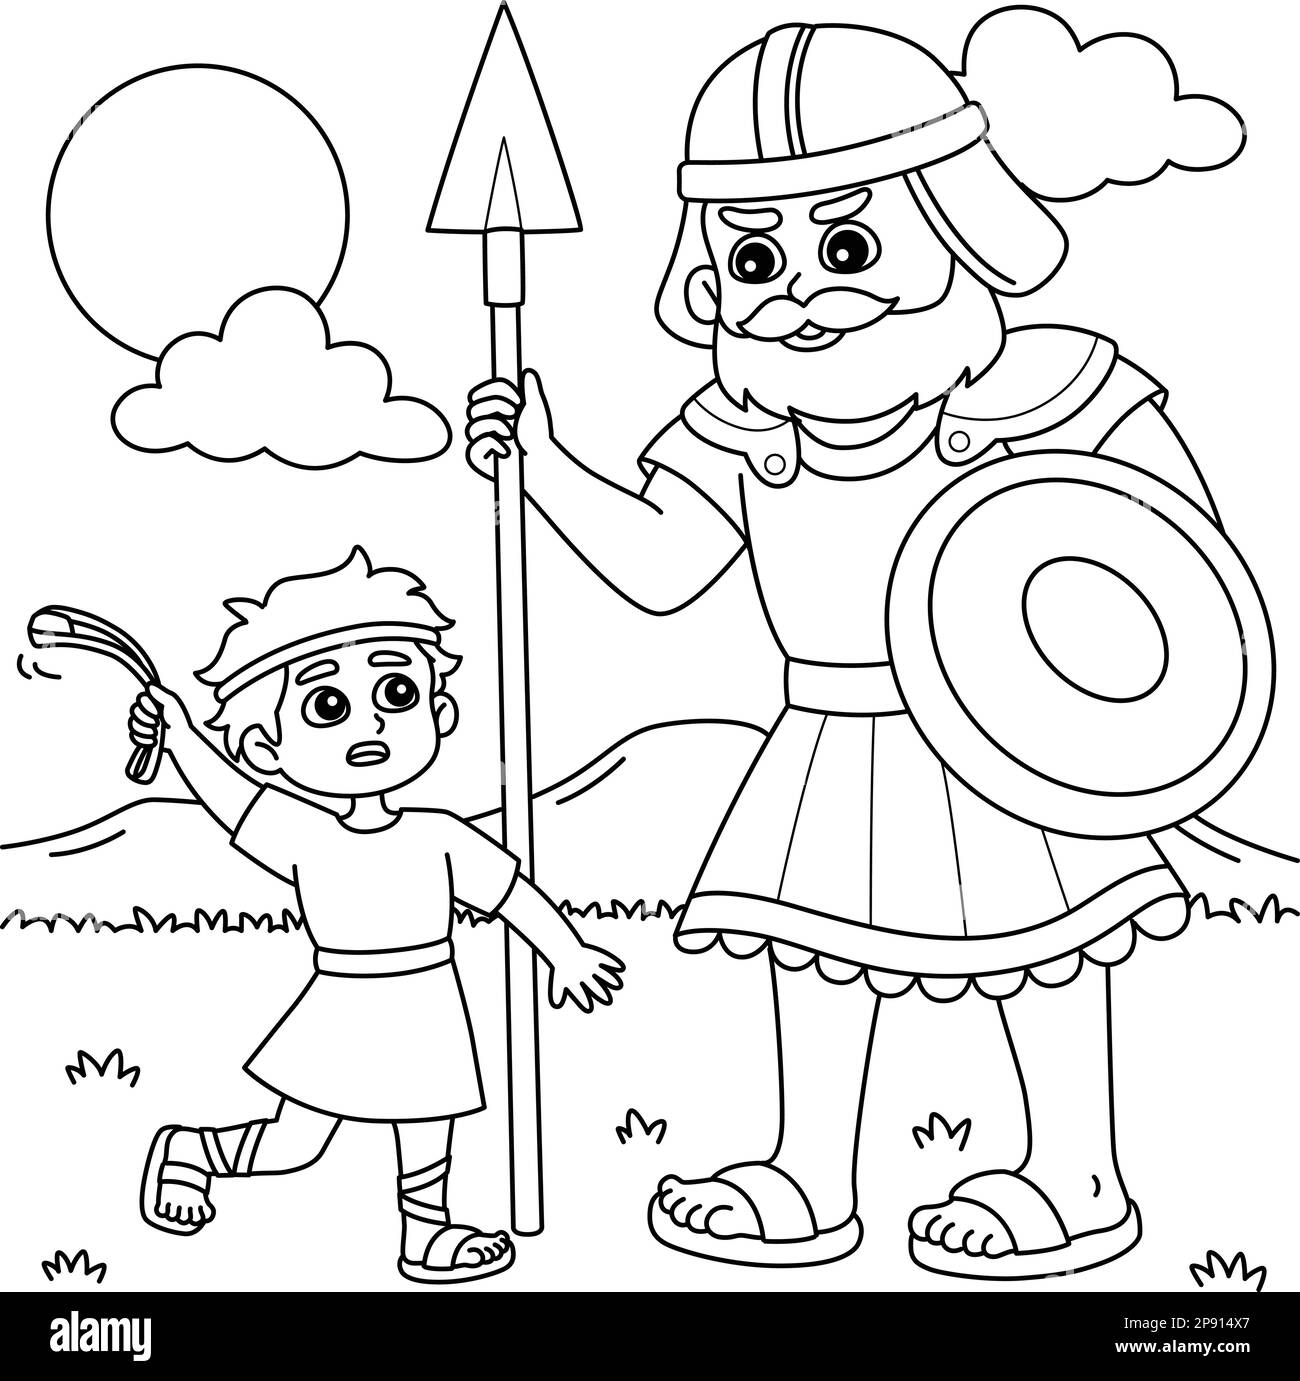 David and Goliath Coloring Page for Kids Stock Vector